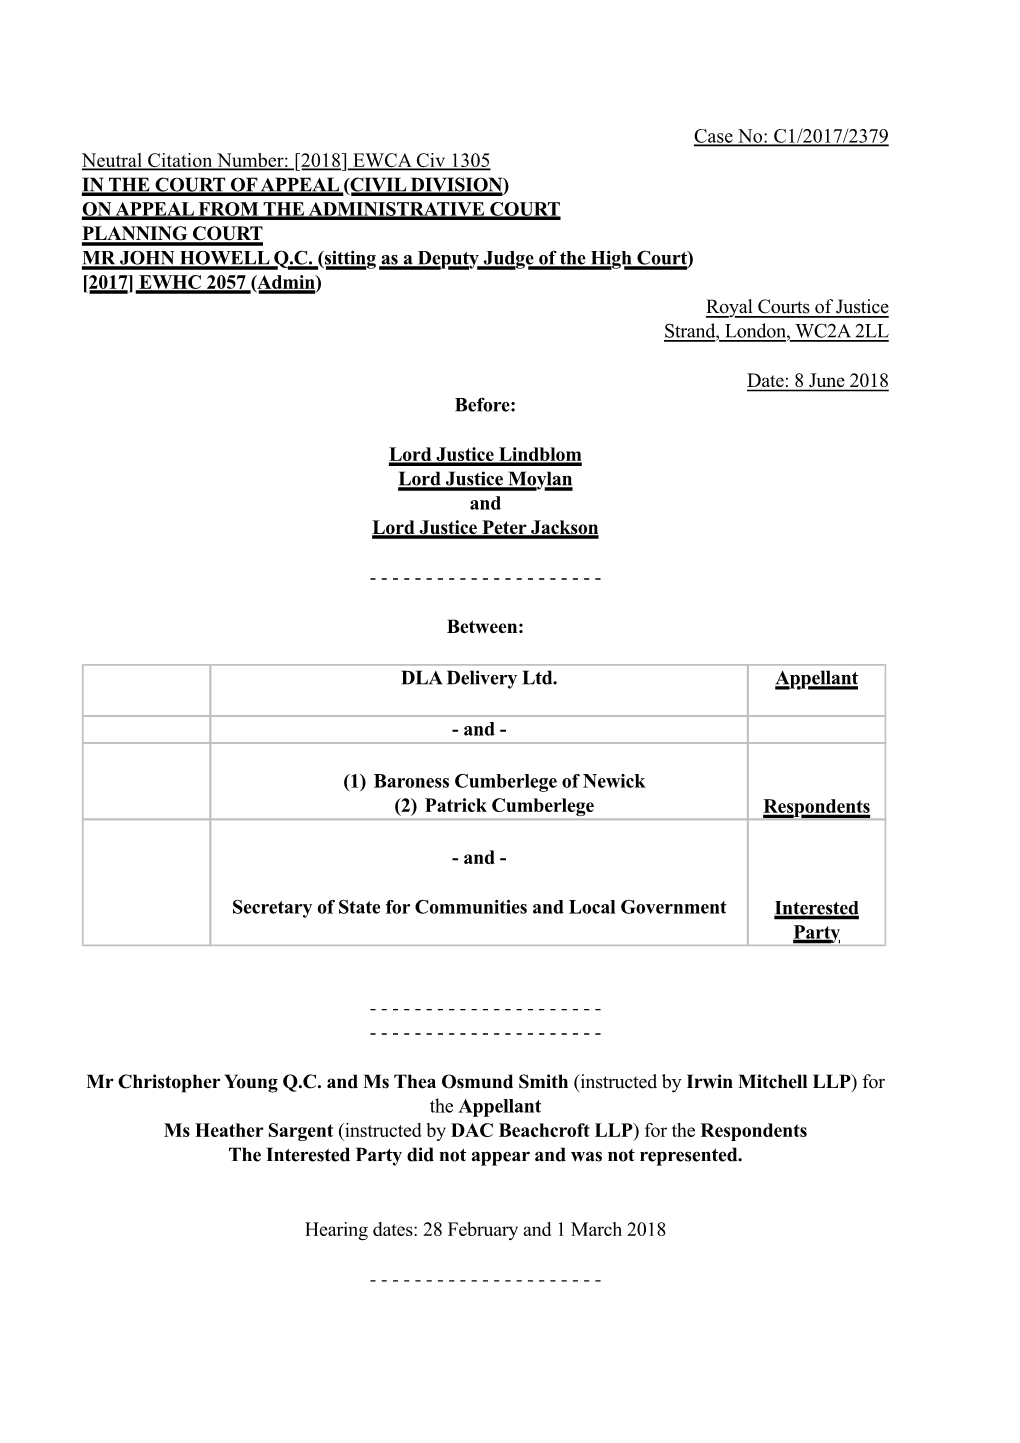 [2018] EWCA Civ 1305 in the COURT of APPEAL (CIVIL DIVISION) on APPEAL from the ADMINISTRATIVE COURT PLANNING COURT MR JOHN HOWELL Q.C